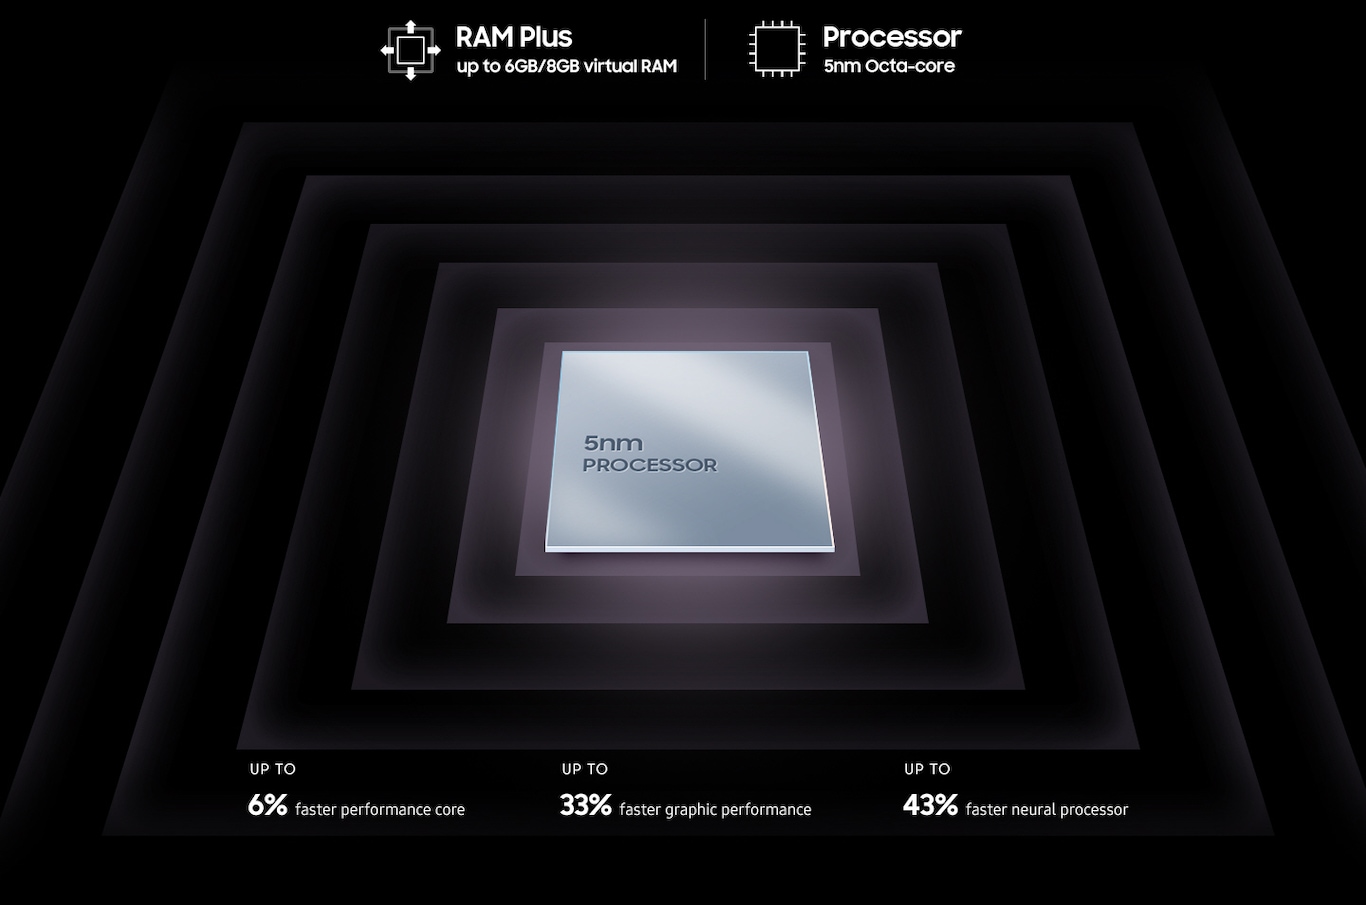 A metallic, square processor chip is shown with text on the surface that reads 5nm processor. Surrounding the chip are text that reads RAM Plus up to 6GB/8GB virtual RAM, Processor 5nm Octa-core, Up to 6% faster performance core, Up to 33% faster graphic performance, Up to 43% faster neural processor.